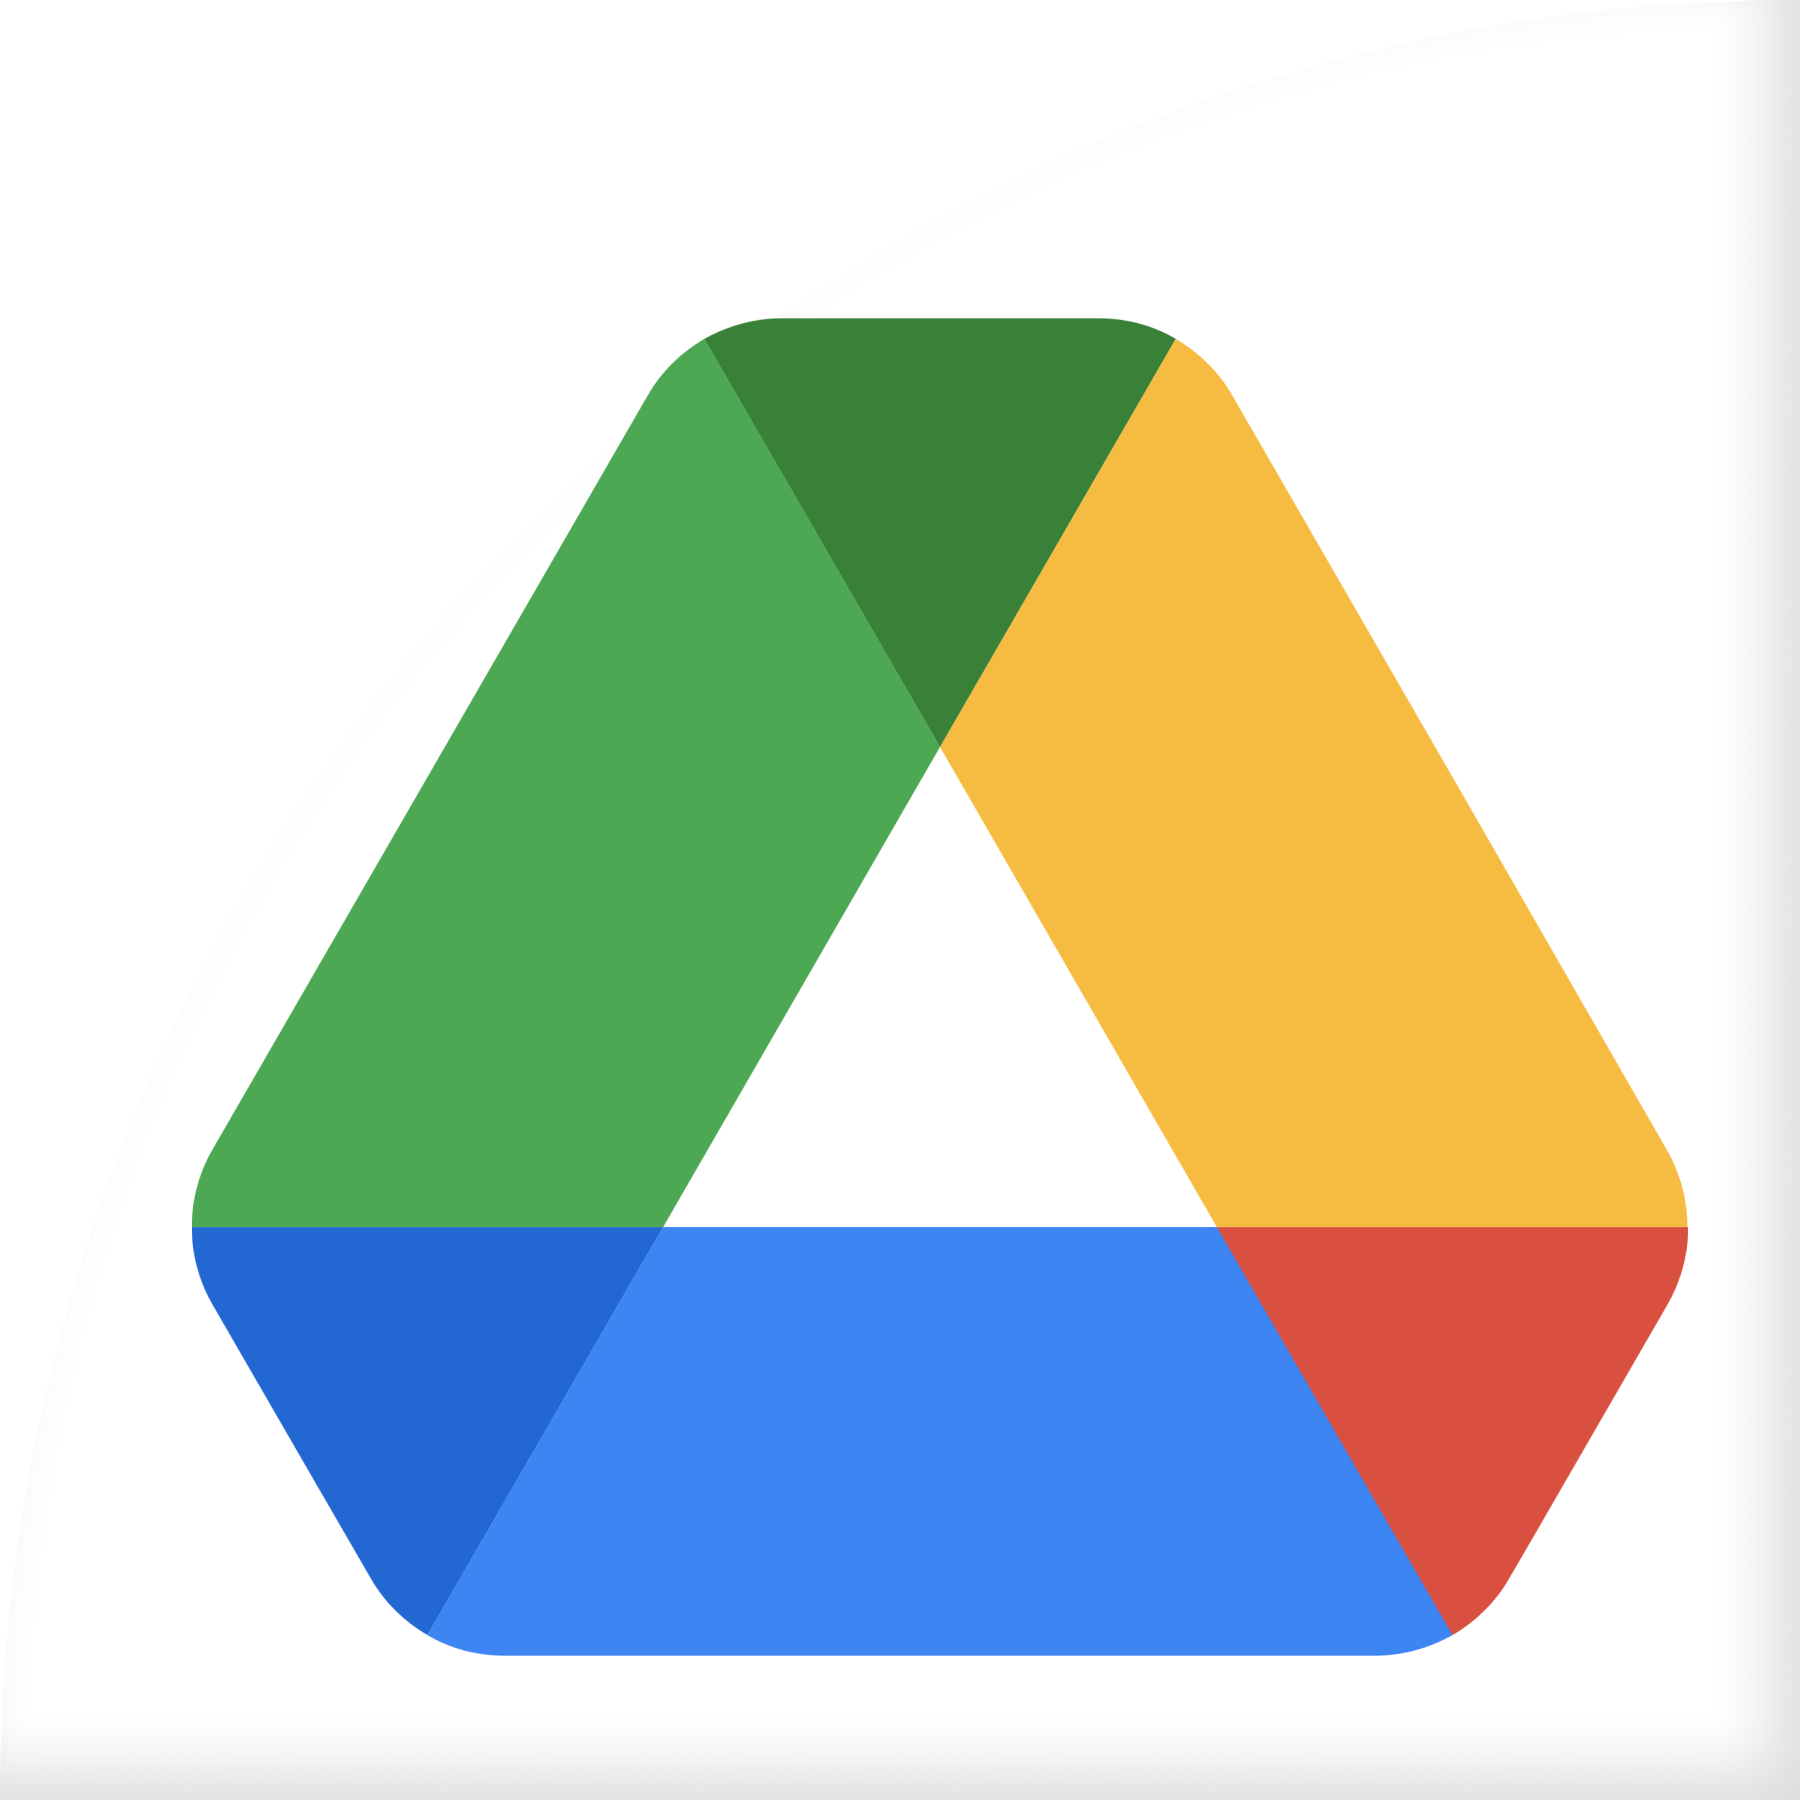 Time to Talk Tech : Google Drive integration now available in Wakelet!